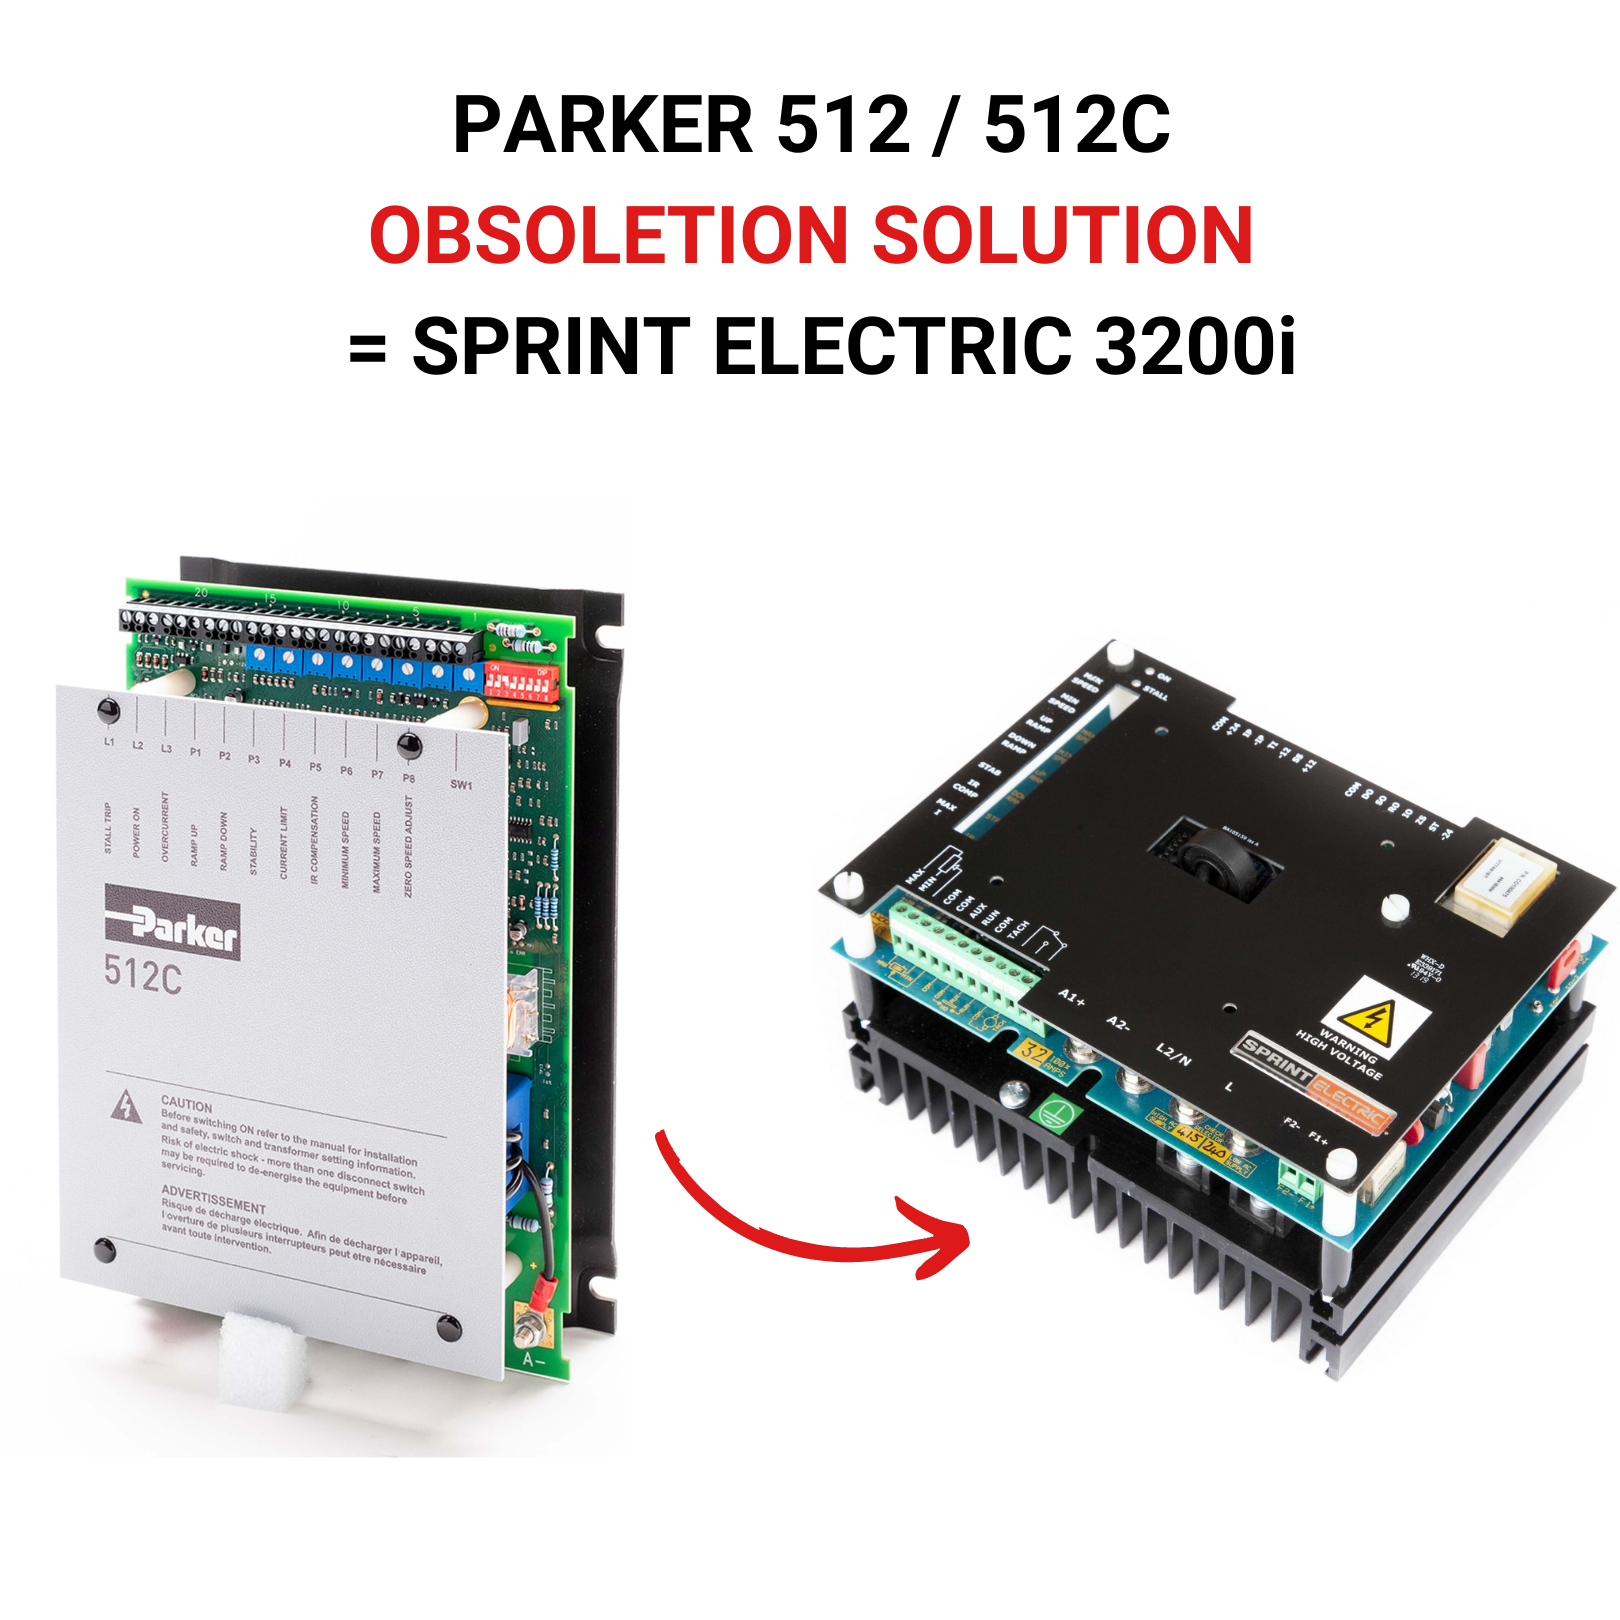 Parker 512 obsoletion solution with Sprint Electric 3200i